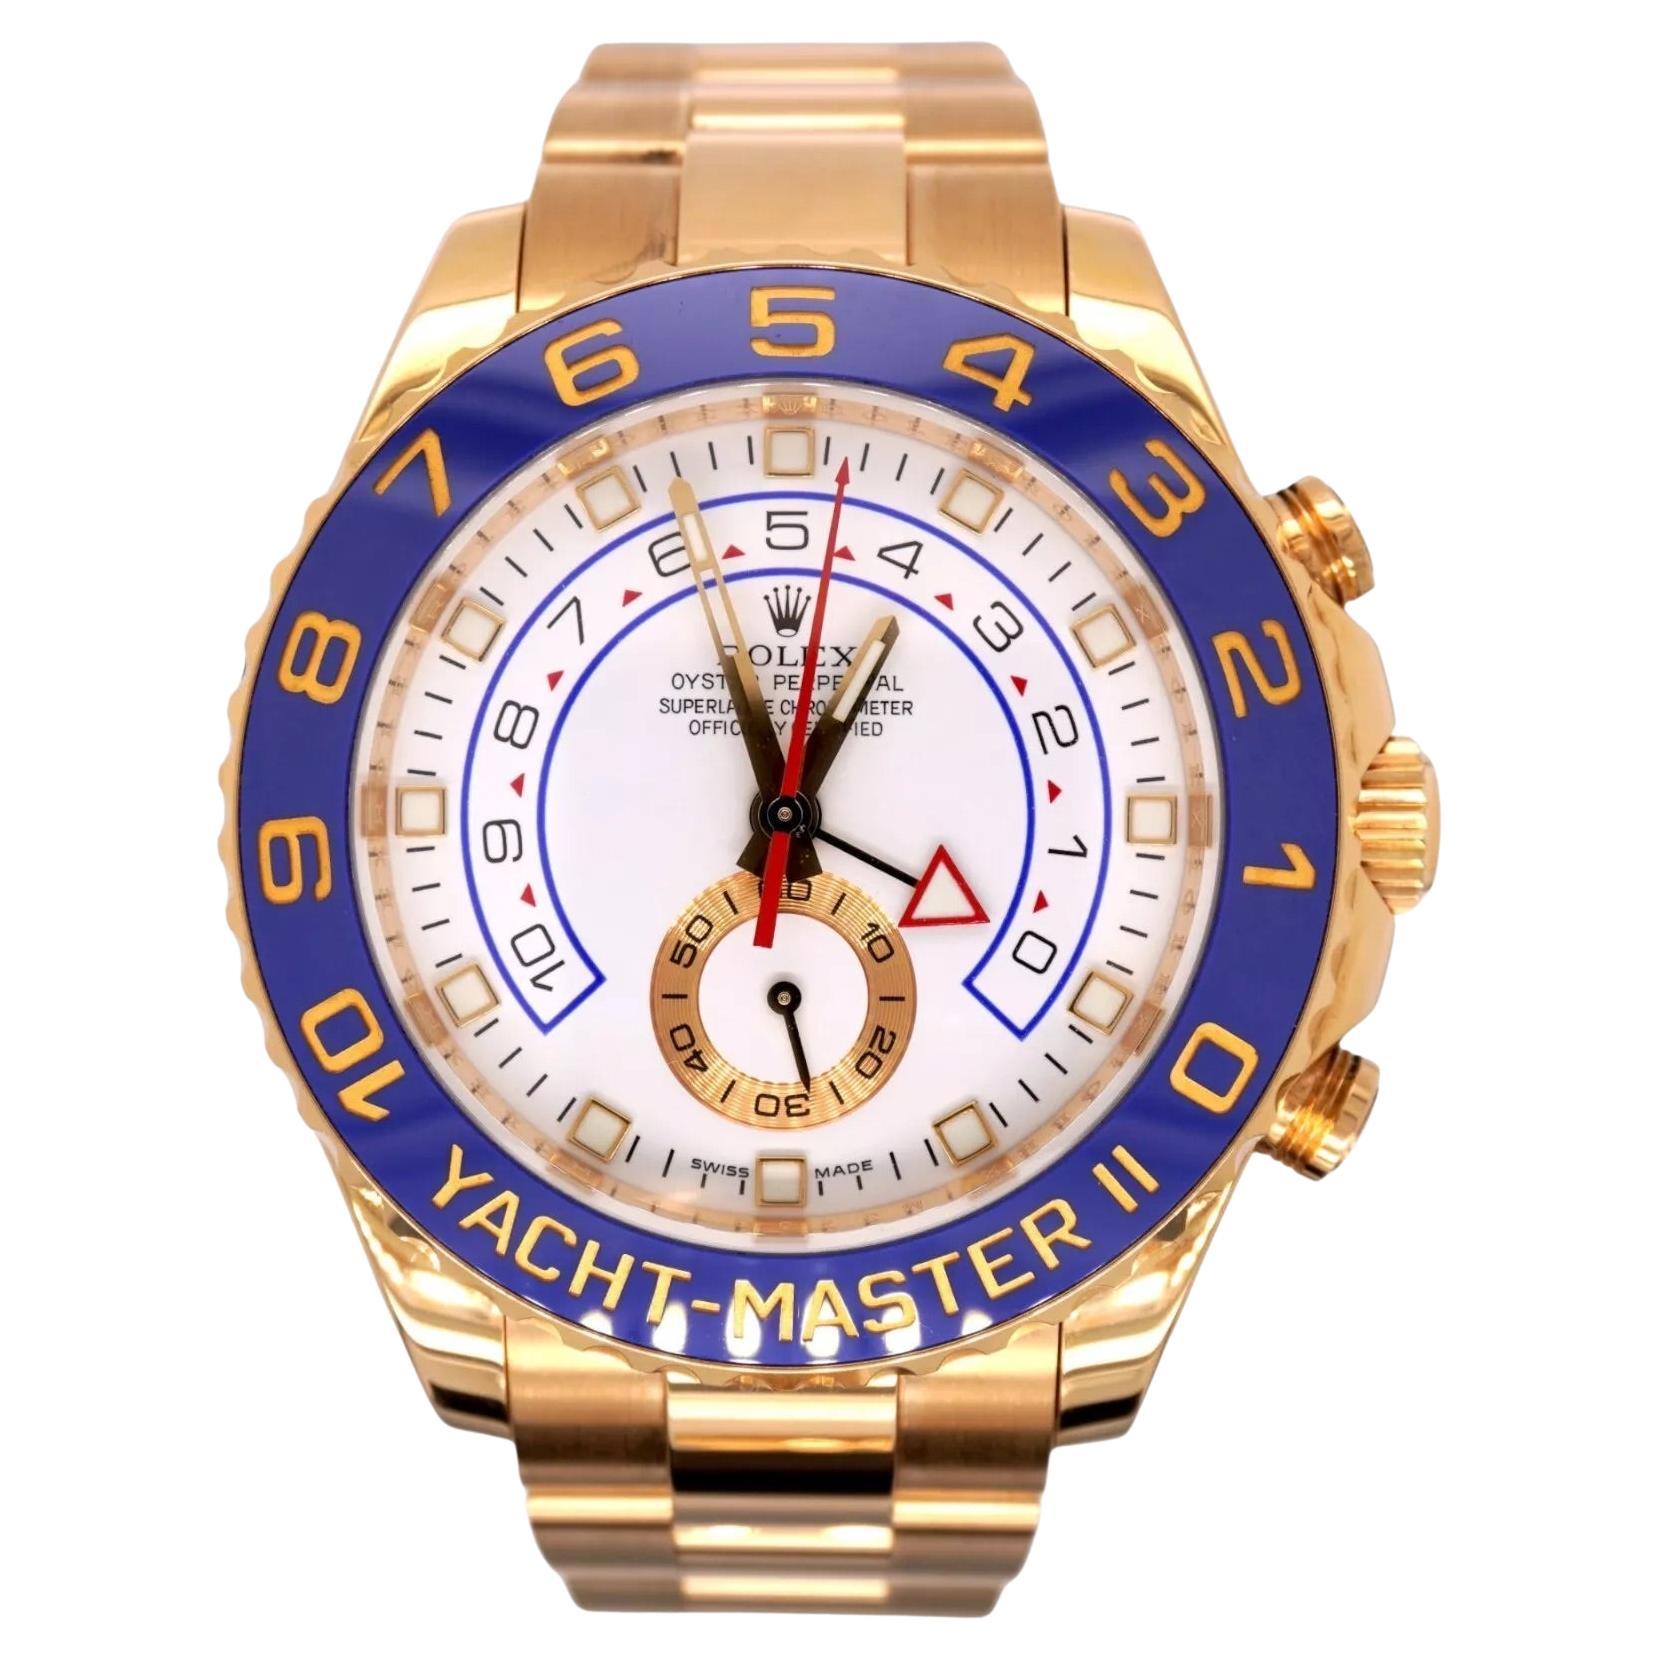 Rolex Yacht-Master II 44mm Oyster Perpetual 18k Yellow Gold White Dial 116688